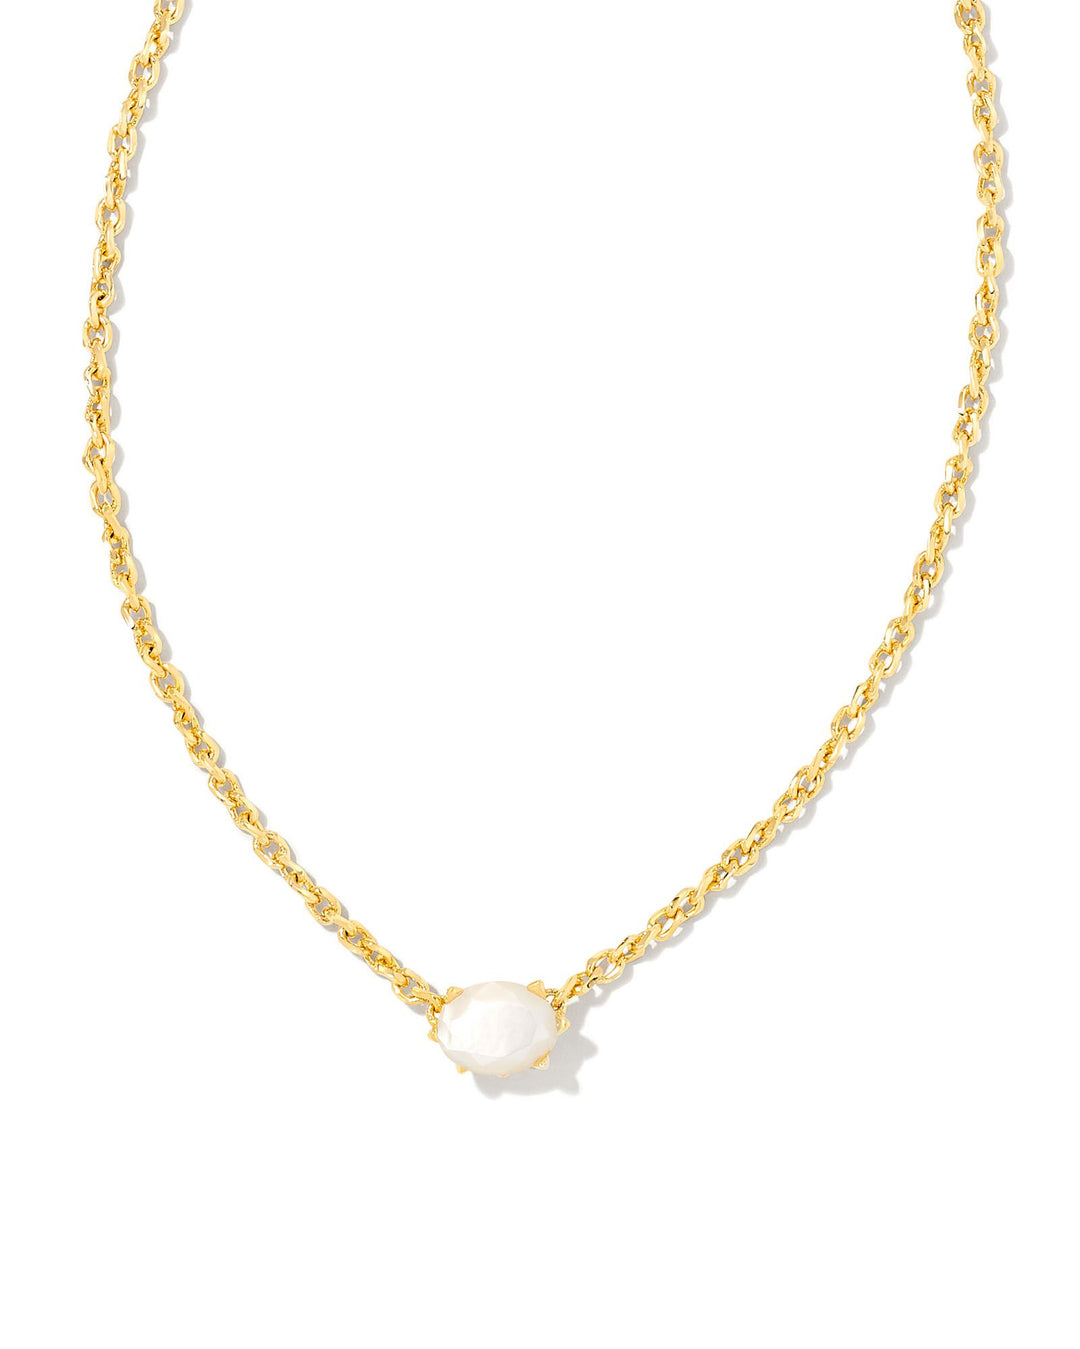 Kendra Scott Cailin Gold Pendant Necklace in Ivory Mother of Pearl